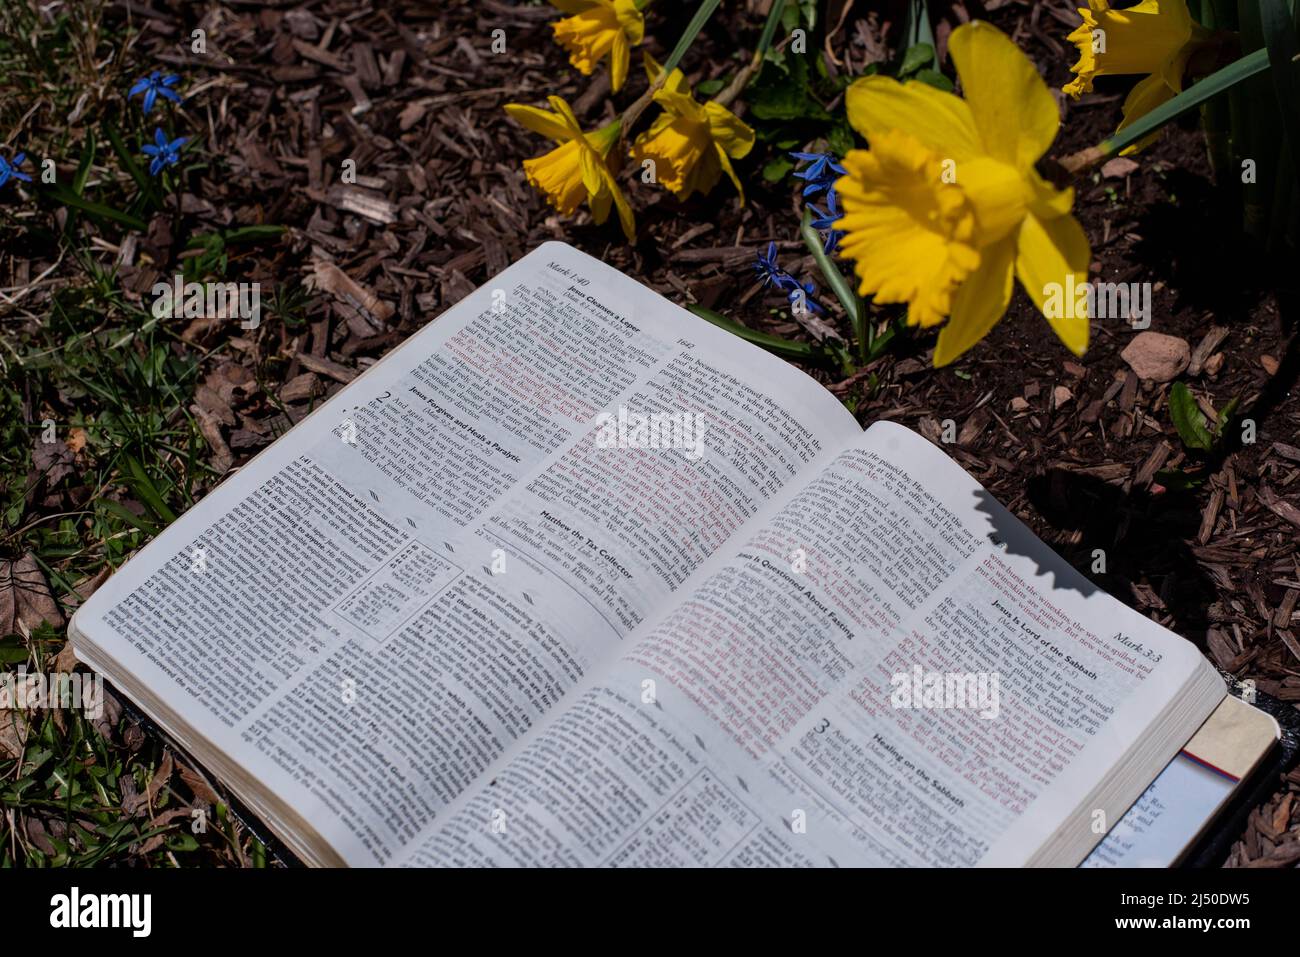 A book next to a bunch of daffodils on a warm spring day. Stock Photo